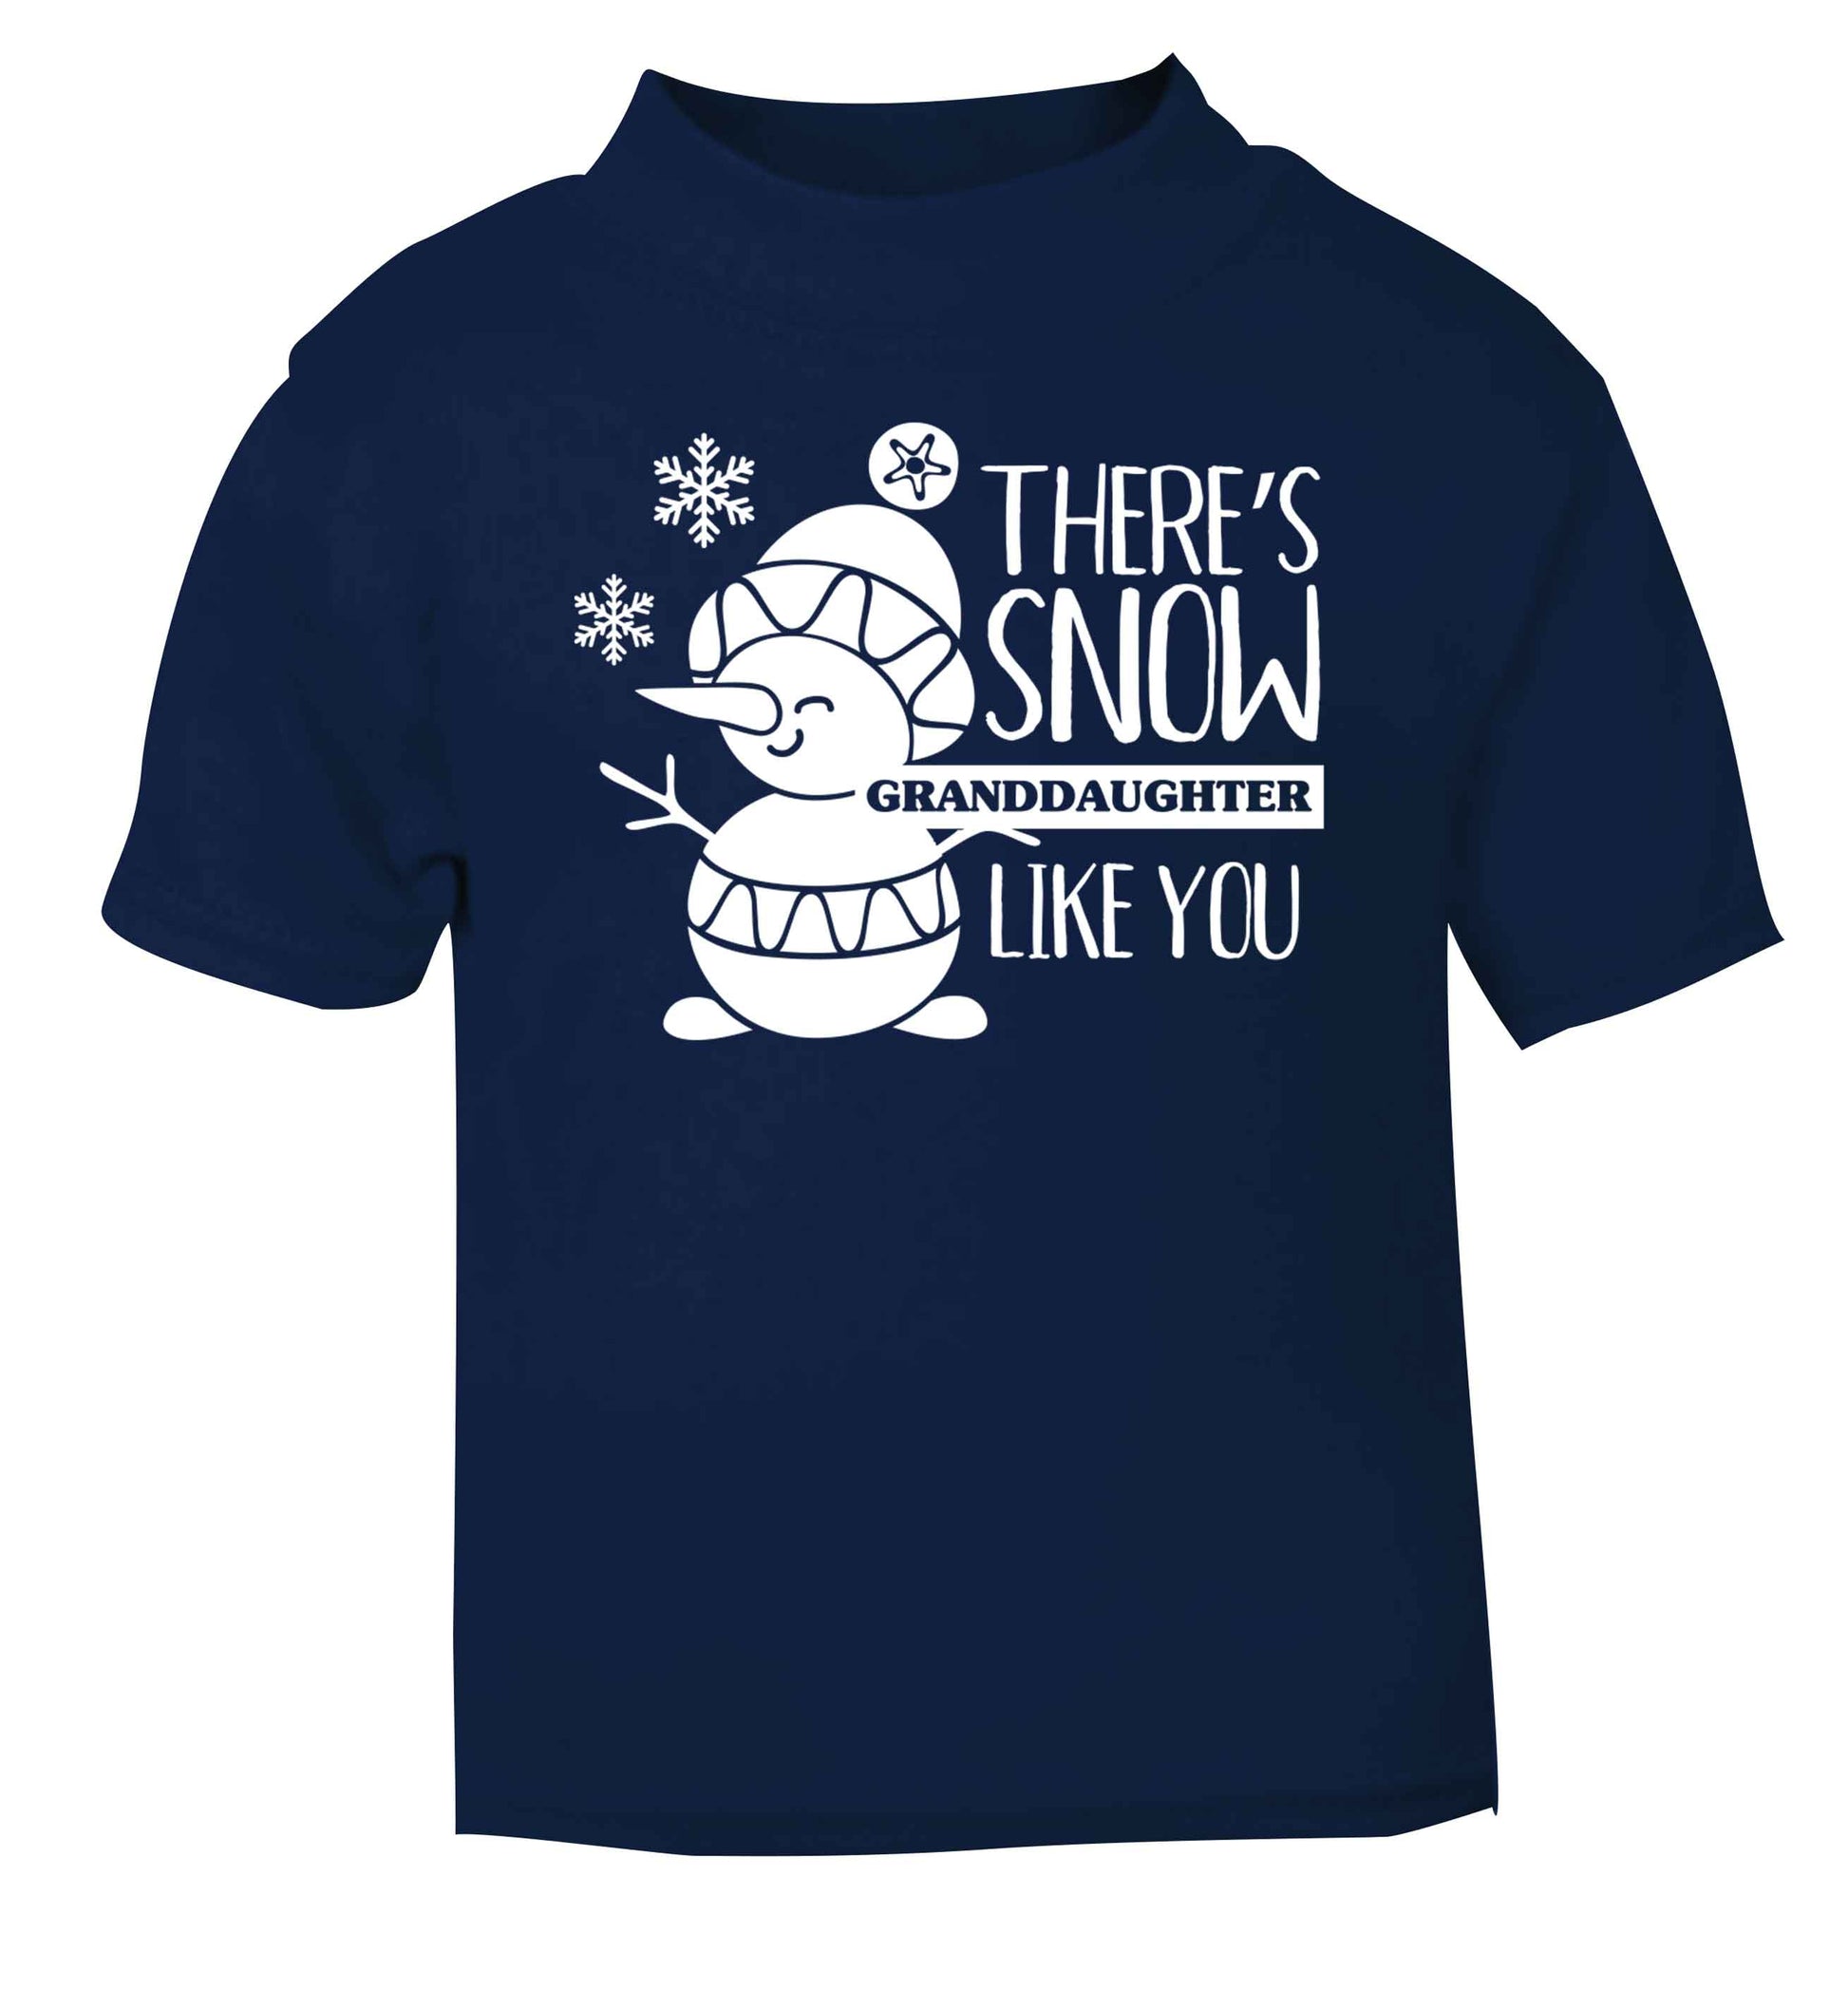 There's snow granddaughter like you navy baby toddler Tshirt 2 Years